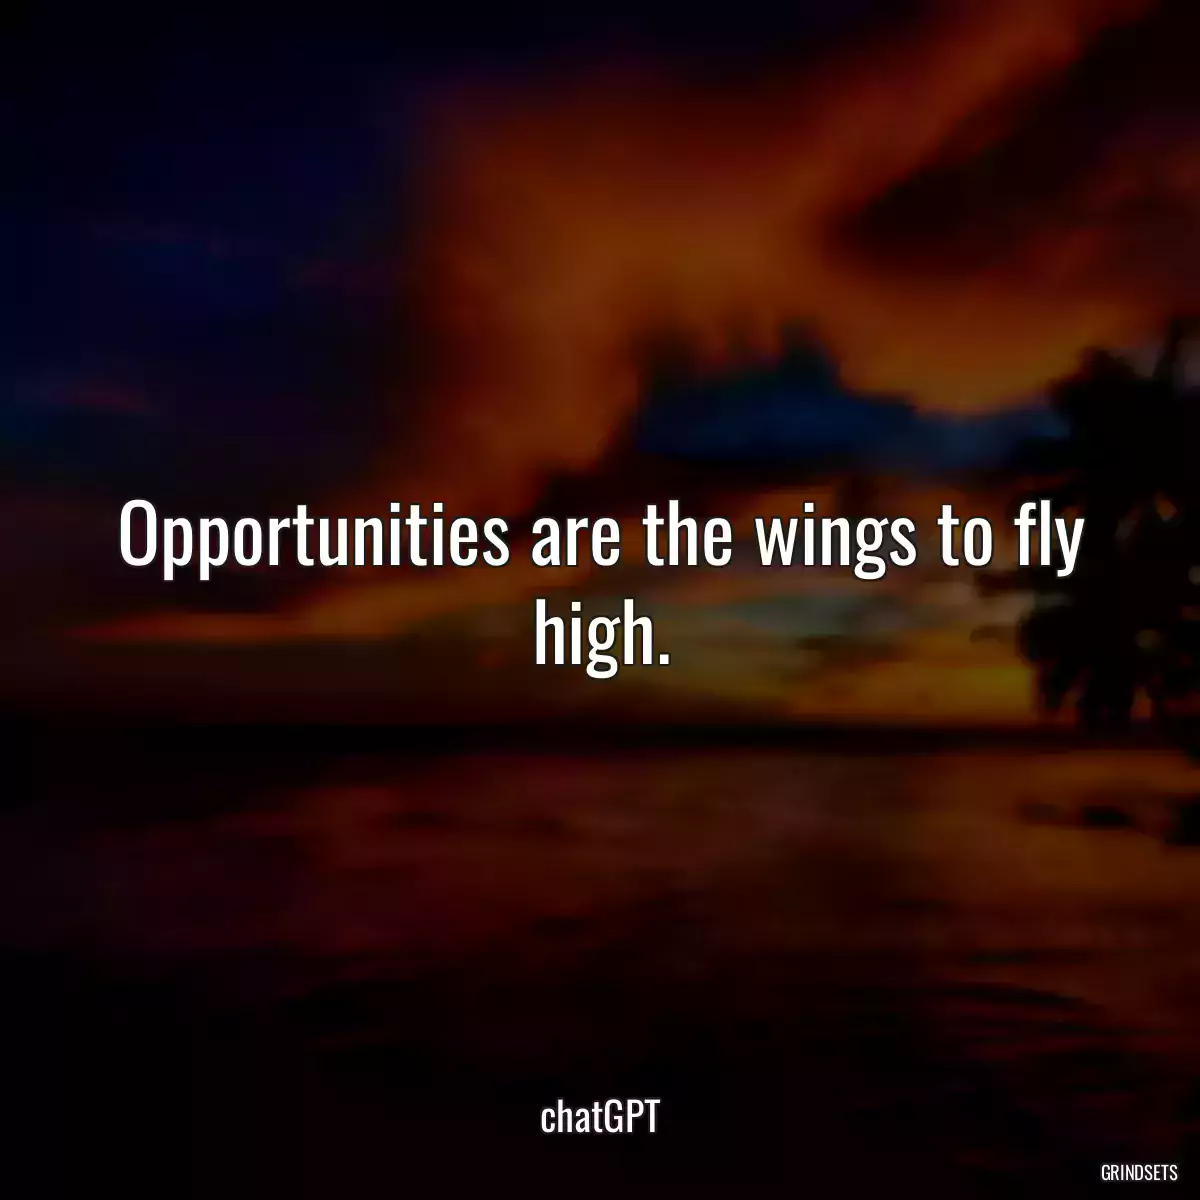 Opportunities are the wings to fly high.